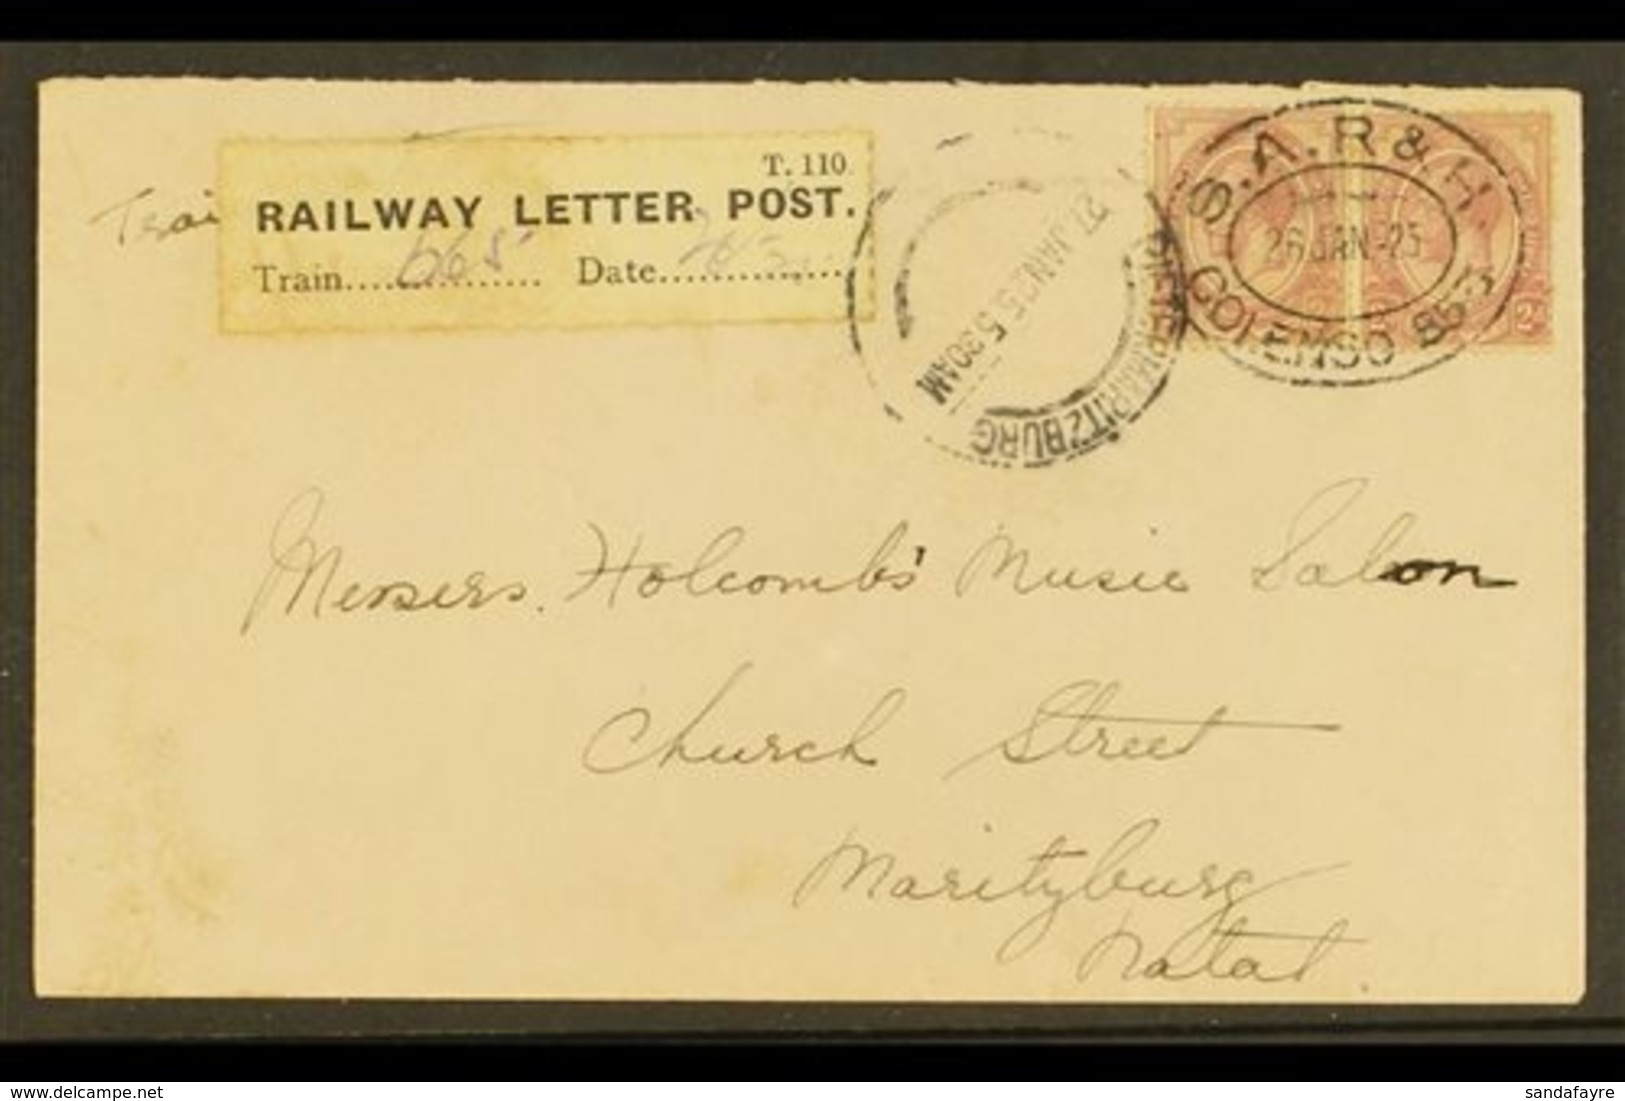 \Y 1925 RAILWAY LETTER POST COVER\Y 2d KGV Pair On Cover, Cancelled With Oval "S.A.R. & H. COLENSO 853" 26.1.25 Postmark - Unclassified